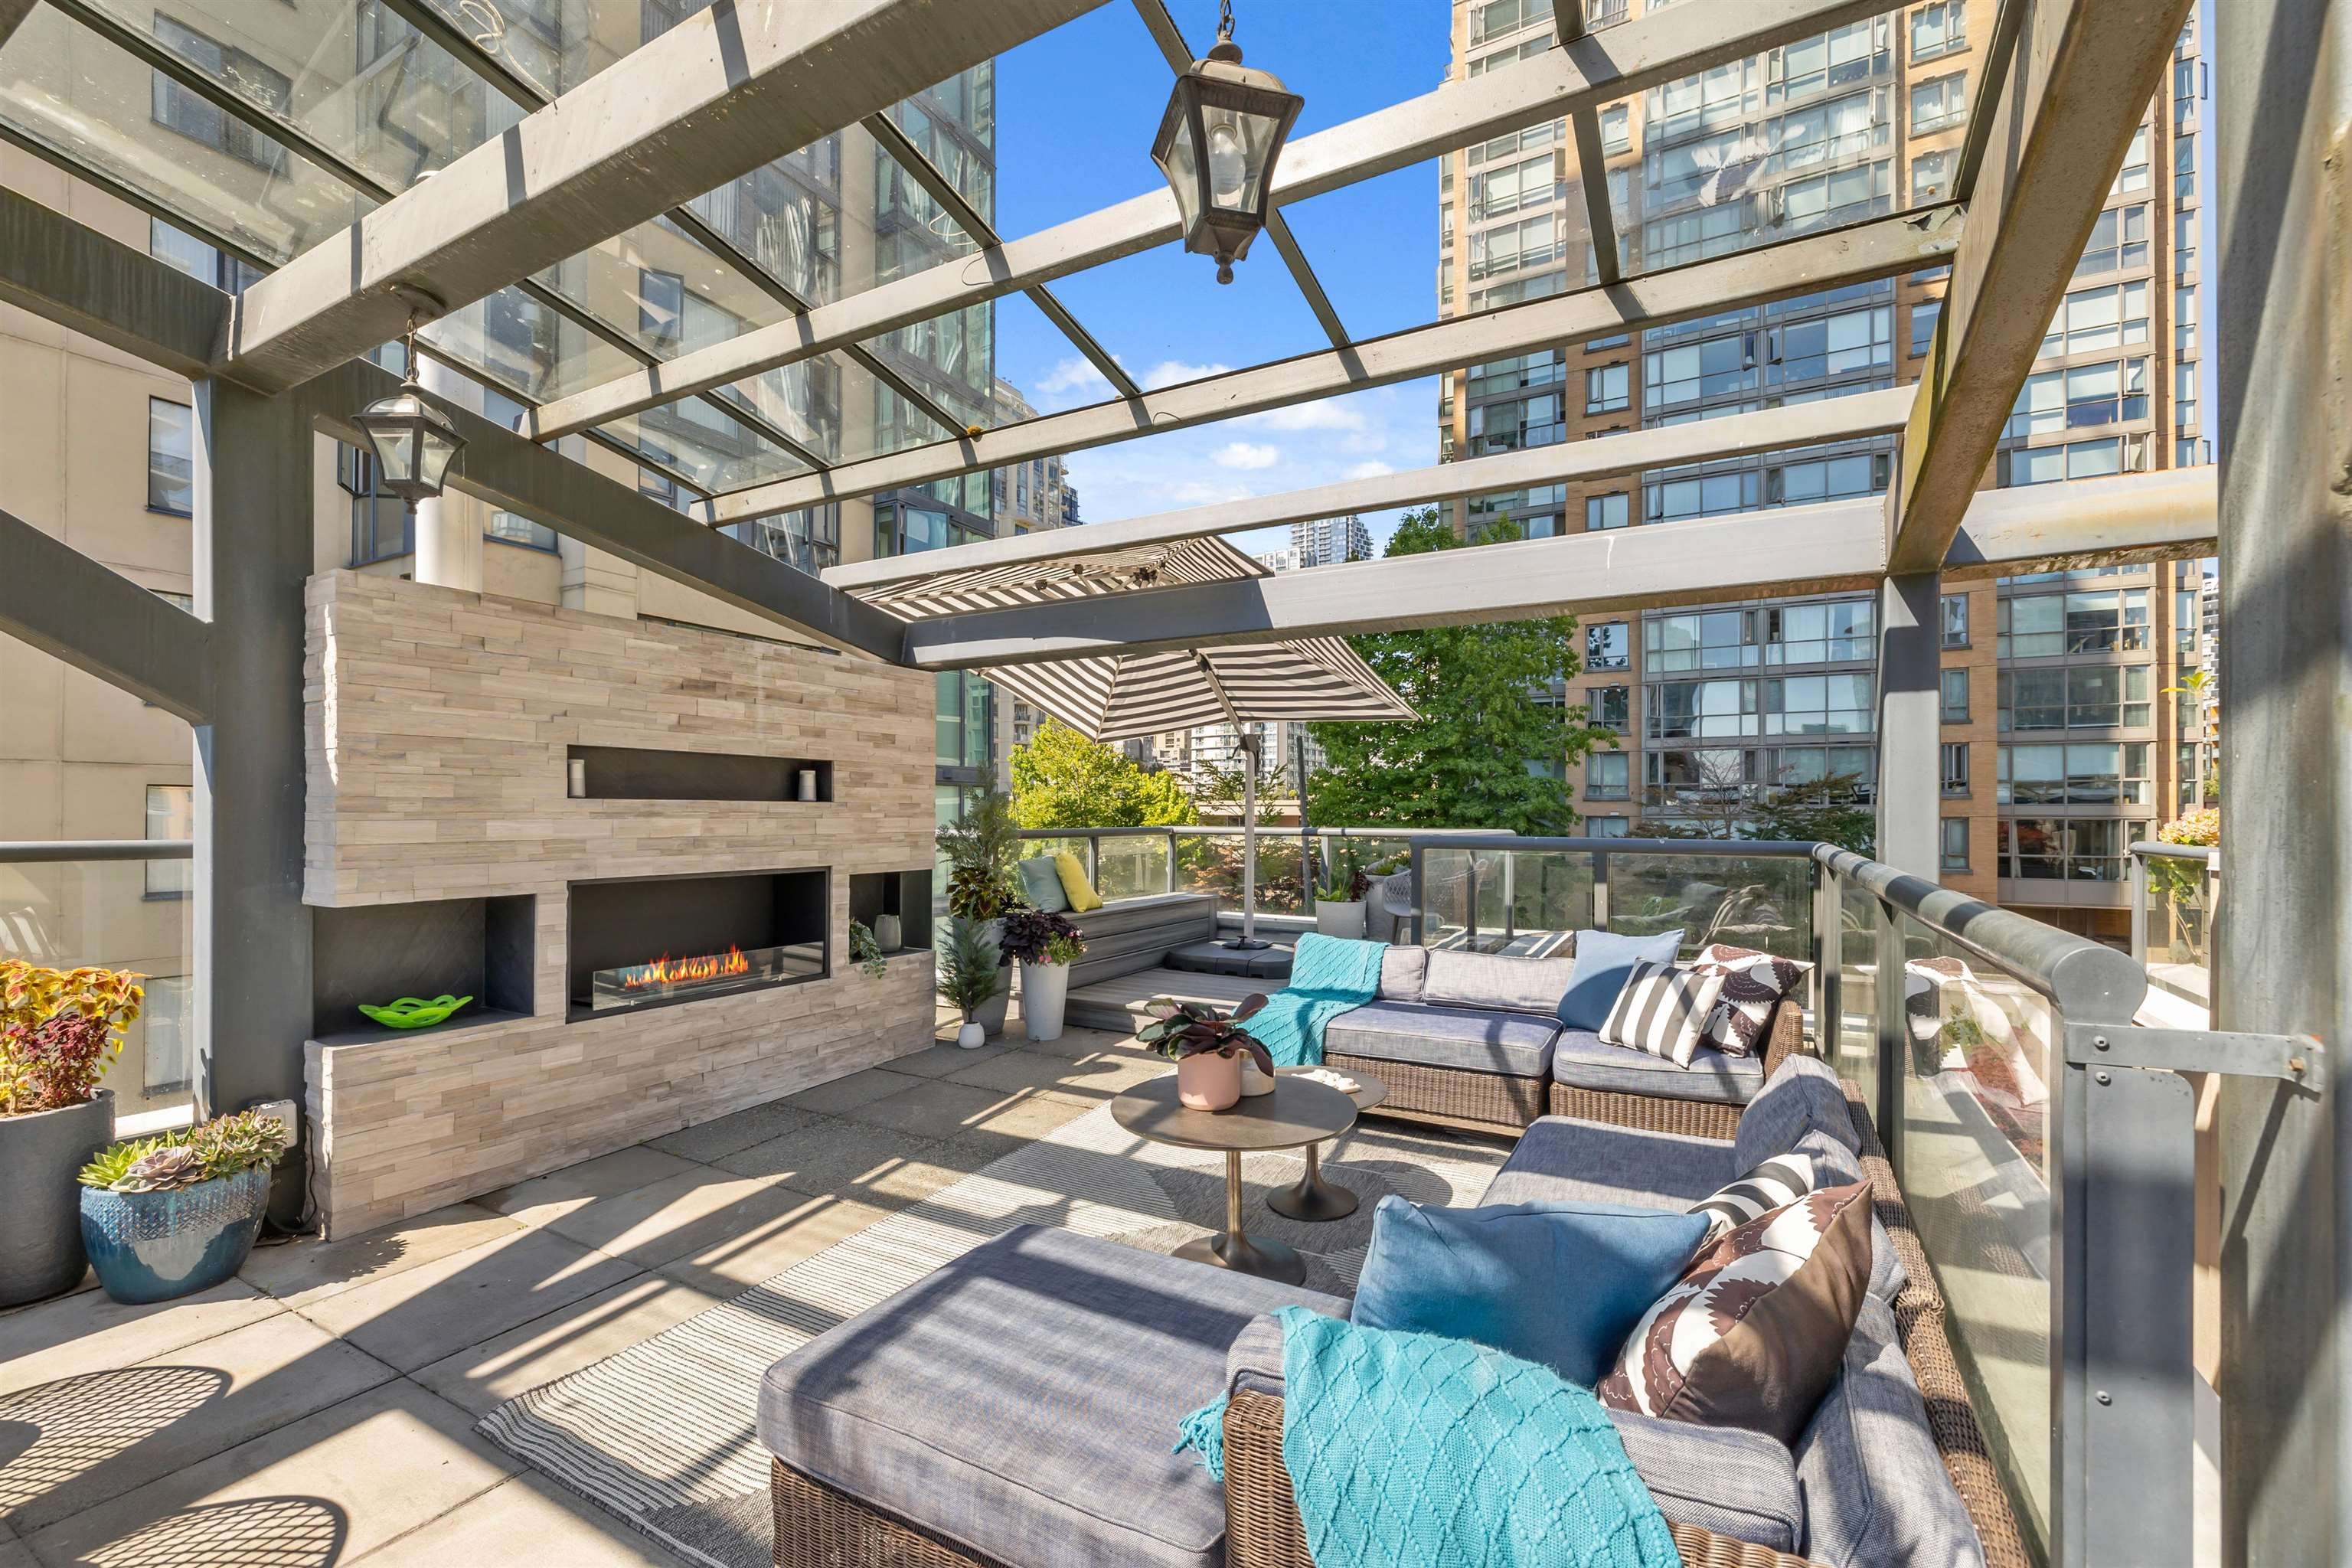 612 sf. Private rooftop patio fully equipped with outdoor kitchen, fireplace and multiple seating areas.